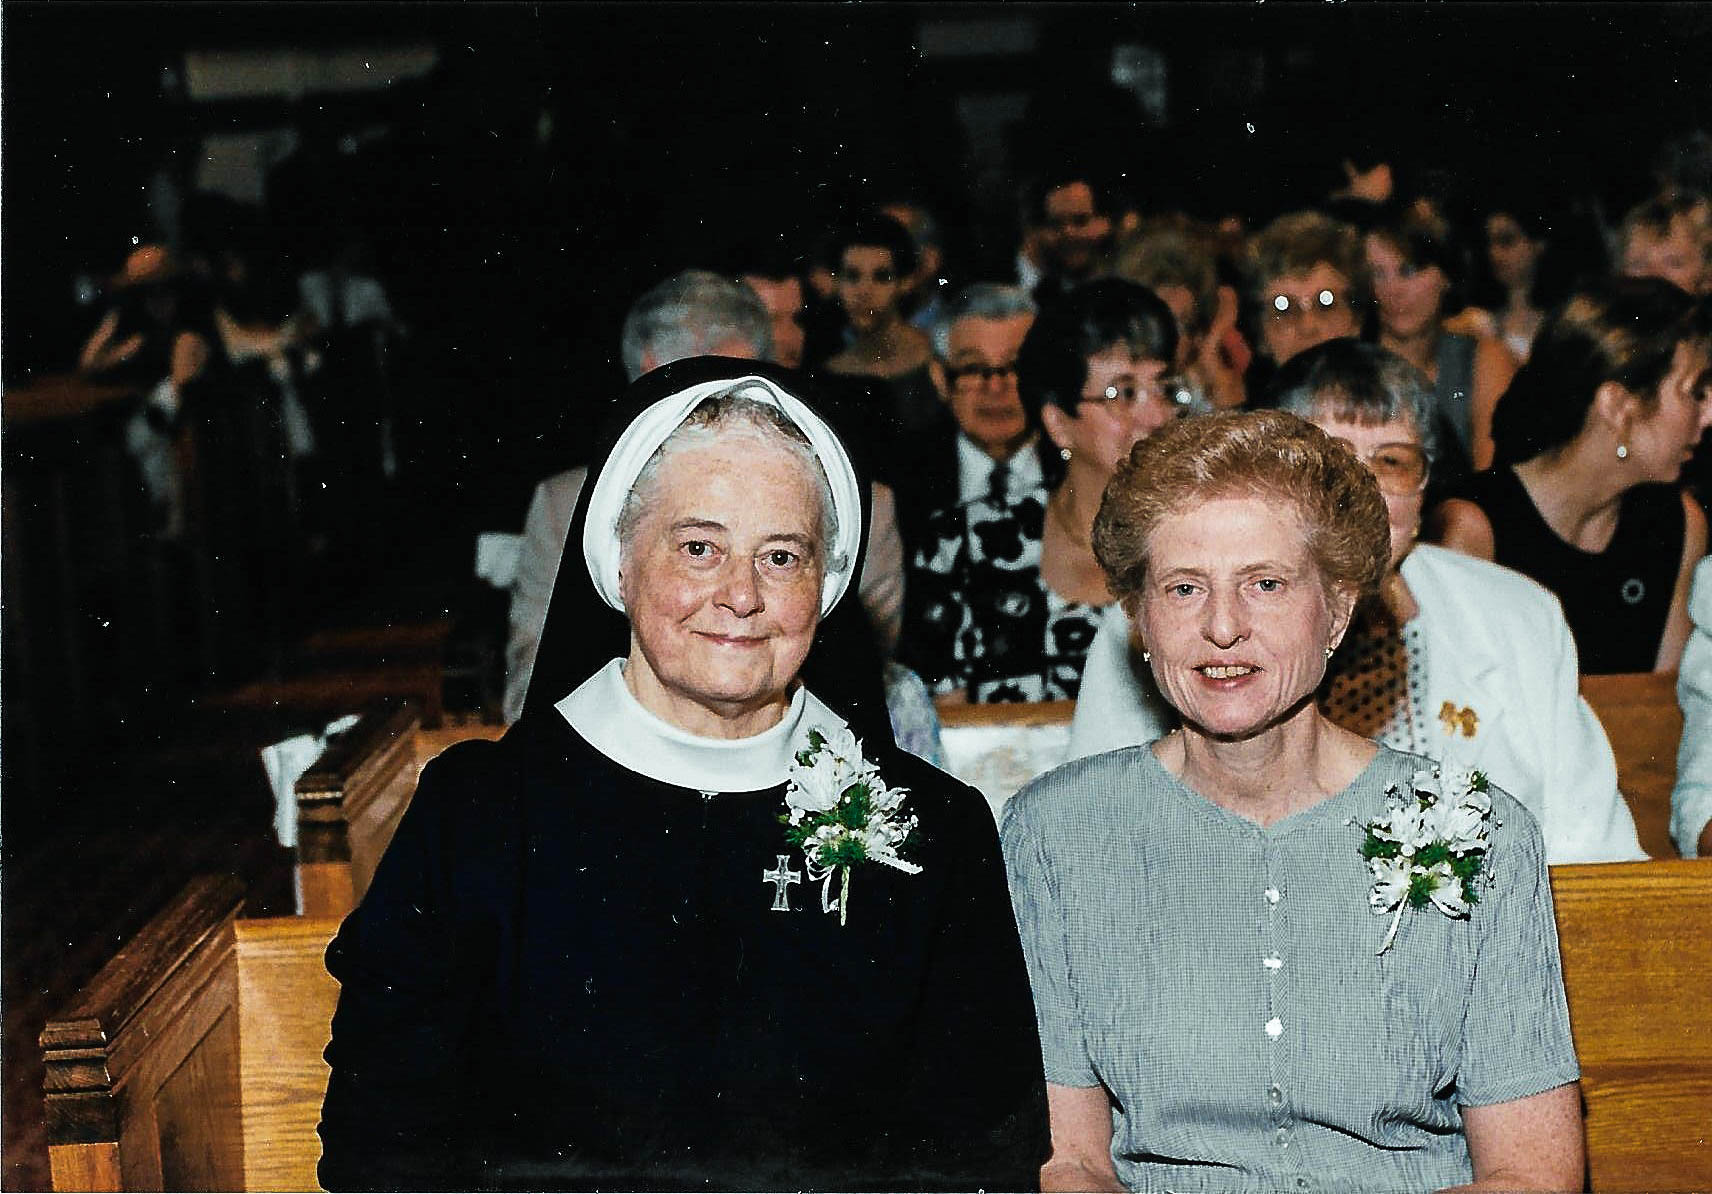 Sisters Mercedes and Kay at a family wedding in 1996. The two remained close until Sister Mercedes’ death in 1997, and Sister Kay says she “felt privileged” to help care for her beloved sister during the last two years of Sister Mercedes’ life.